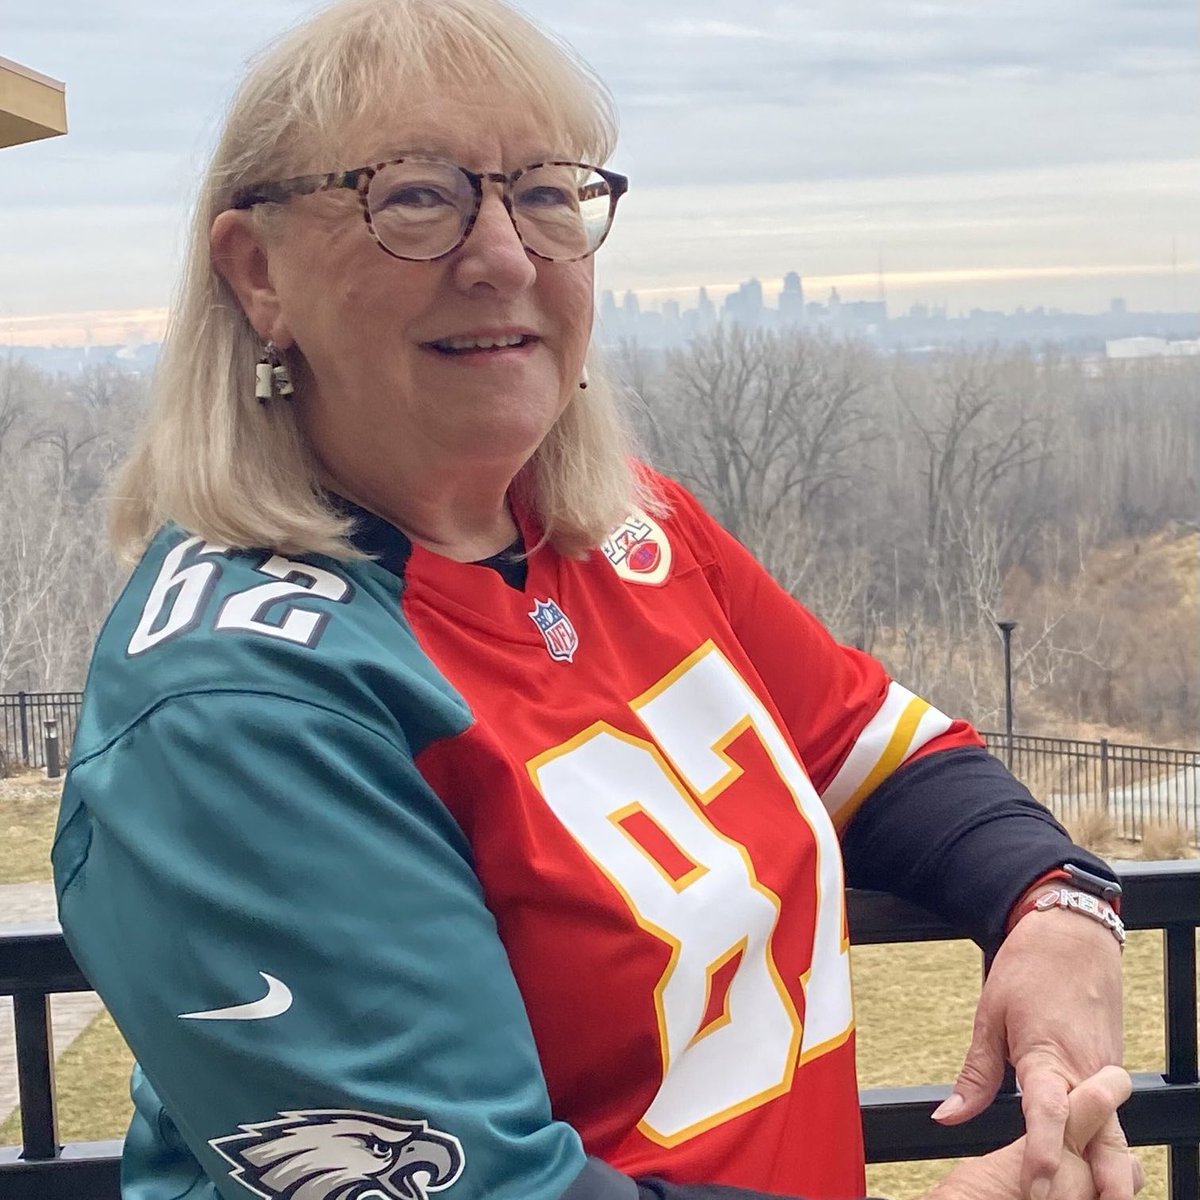 At Super Bowl LVII, Donna Kelce will officially become the first mother to have two sons play against each other in the Super Bowl.